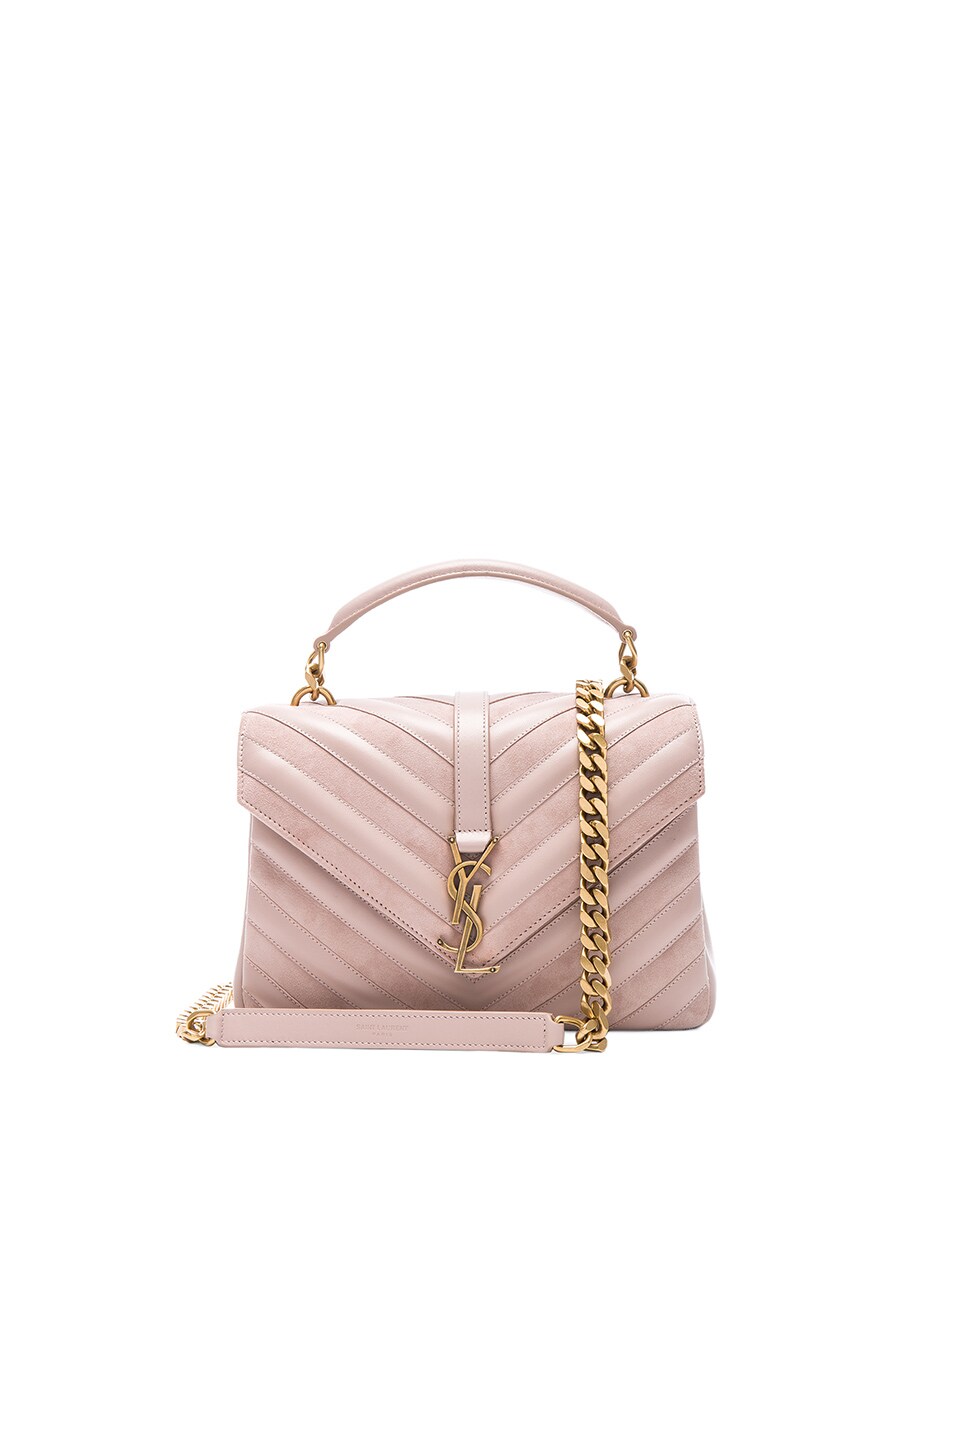 Image 1 of Saint Laurent Medium Leather & Suede Patchwork Monogramme College Bag in Poudre